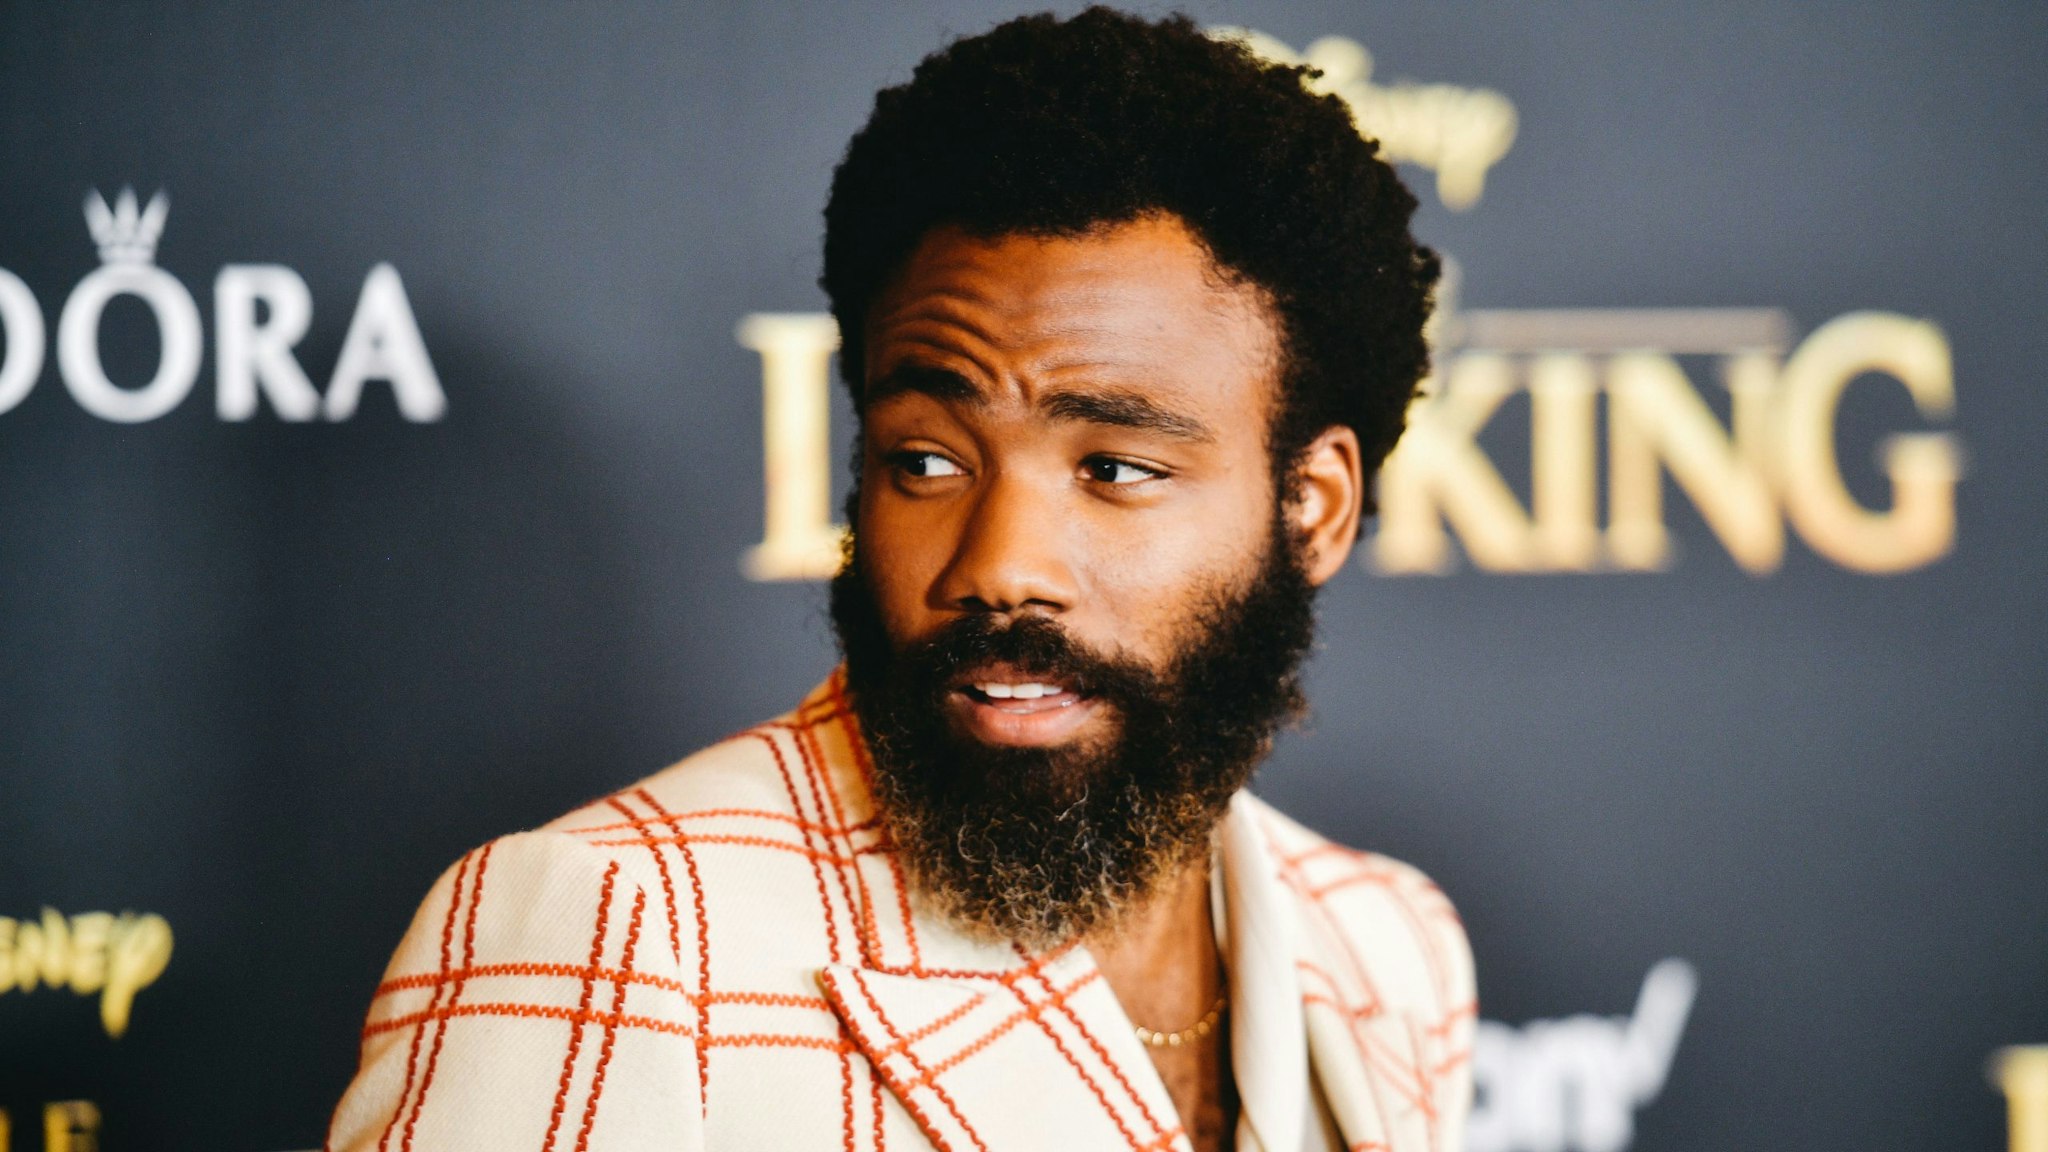 HOLLYWOOD, CALIFORNIA - JULY 09: (EDITORS NOTE: Image has been edited using digital filters) Donald Glover attends the premiere of Disney's "The Lion King" at Dolby Theatre on July 09, 2019 in Hollywood, California.